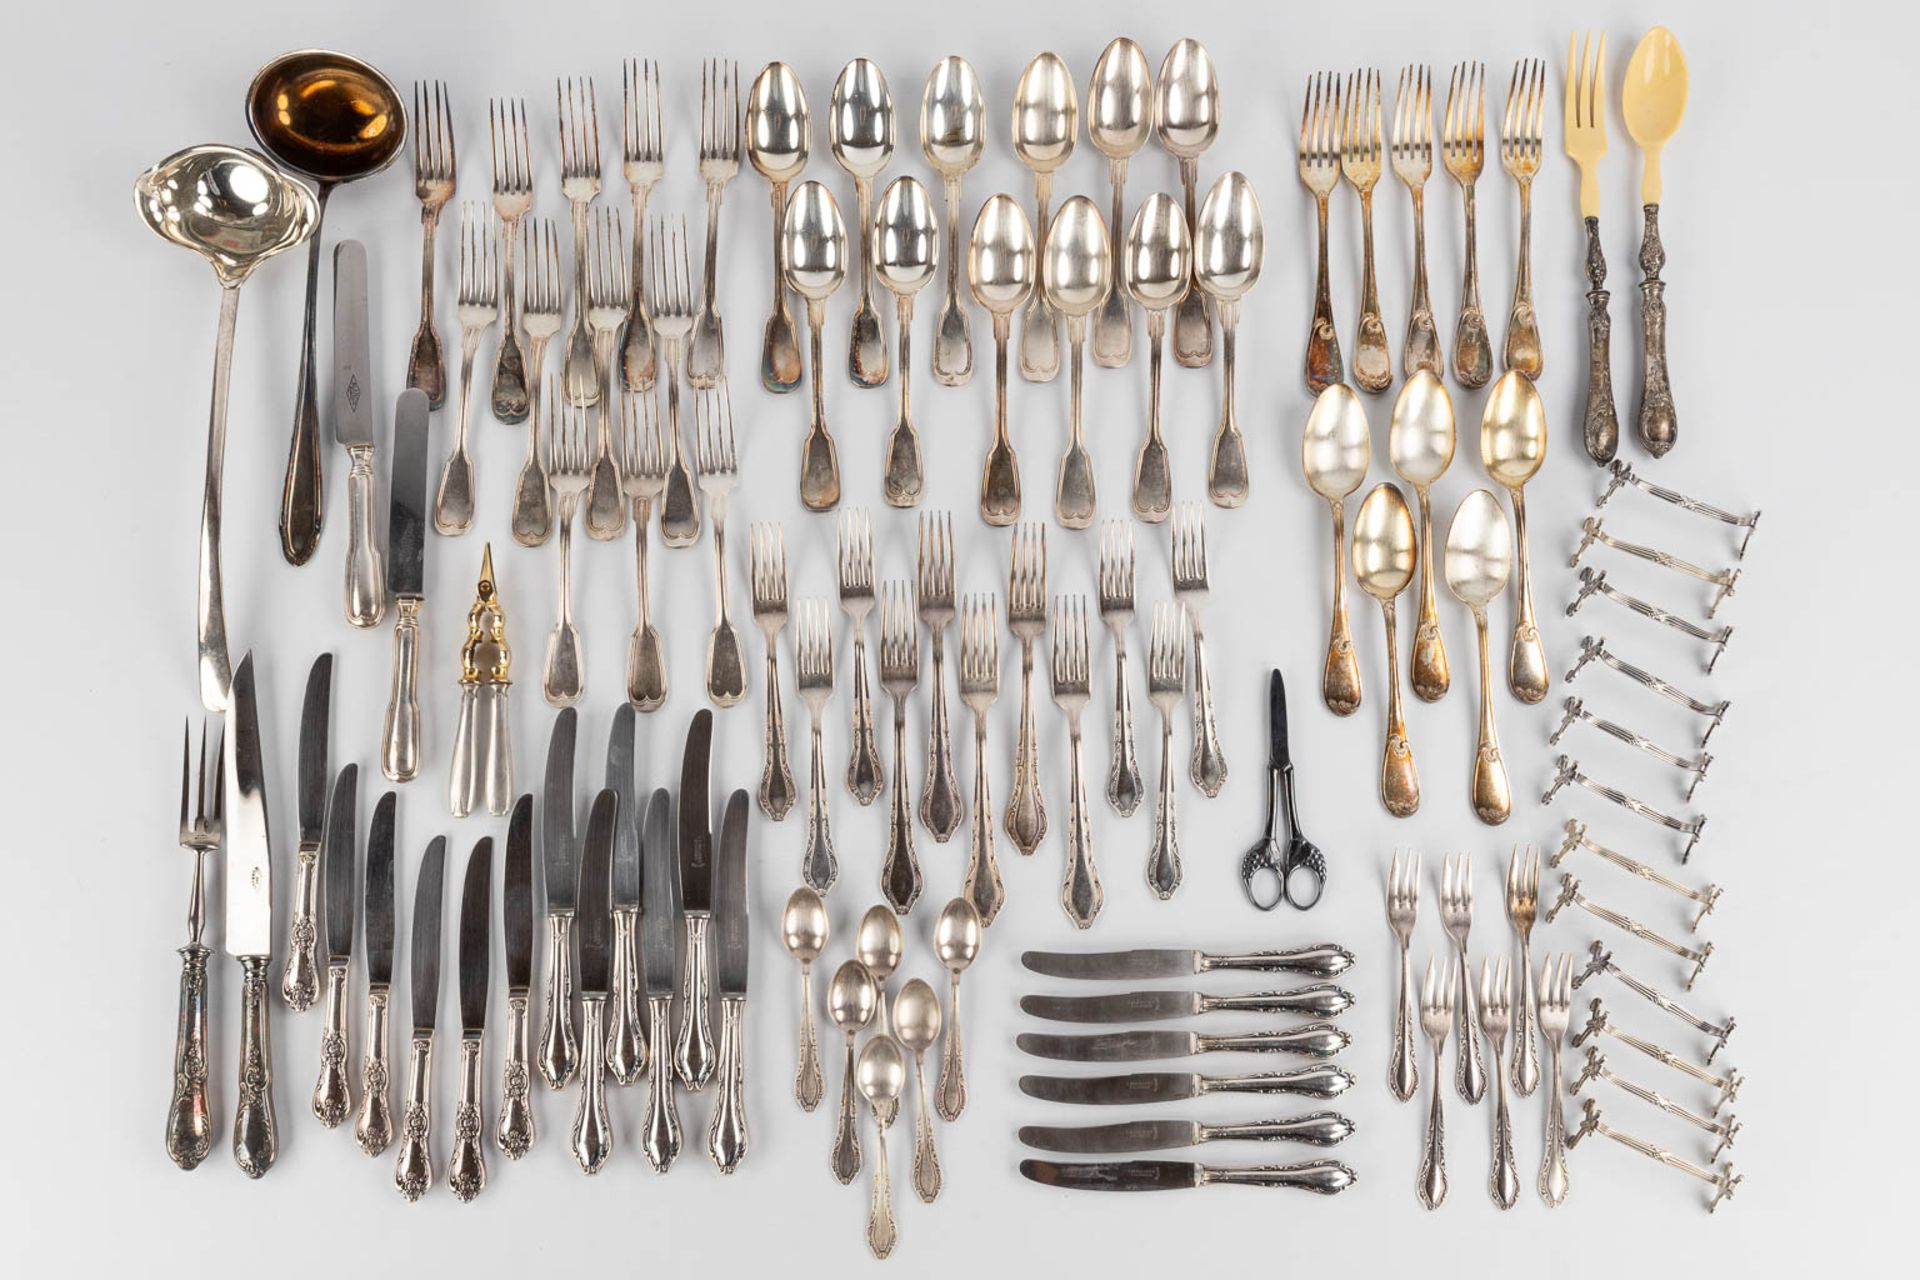 A large collection of serving accessories and cutlery, silver-plated metal. (W:35 cm)